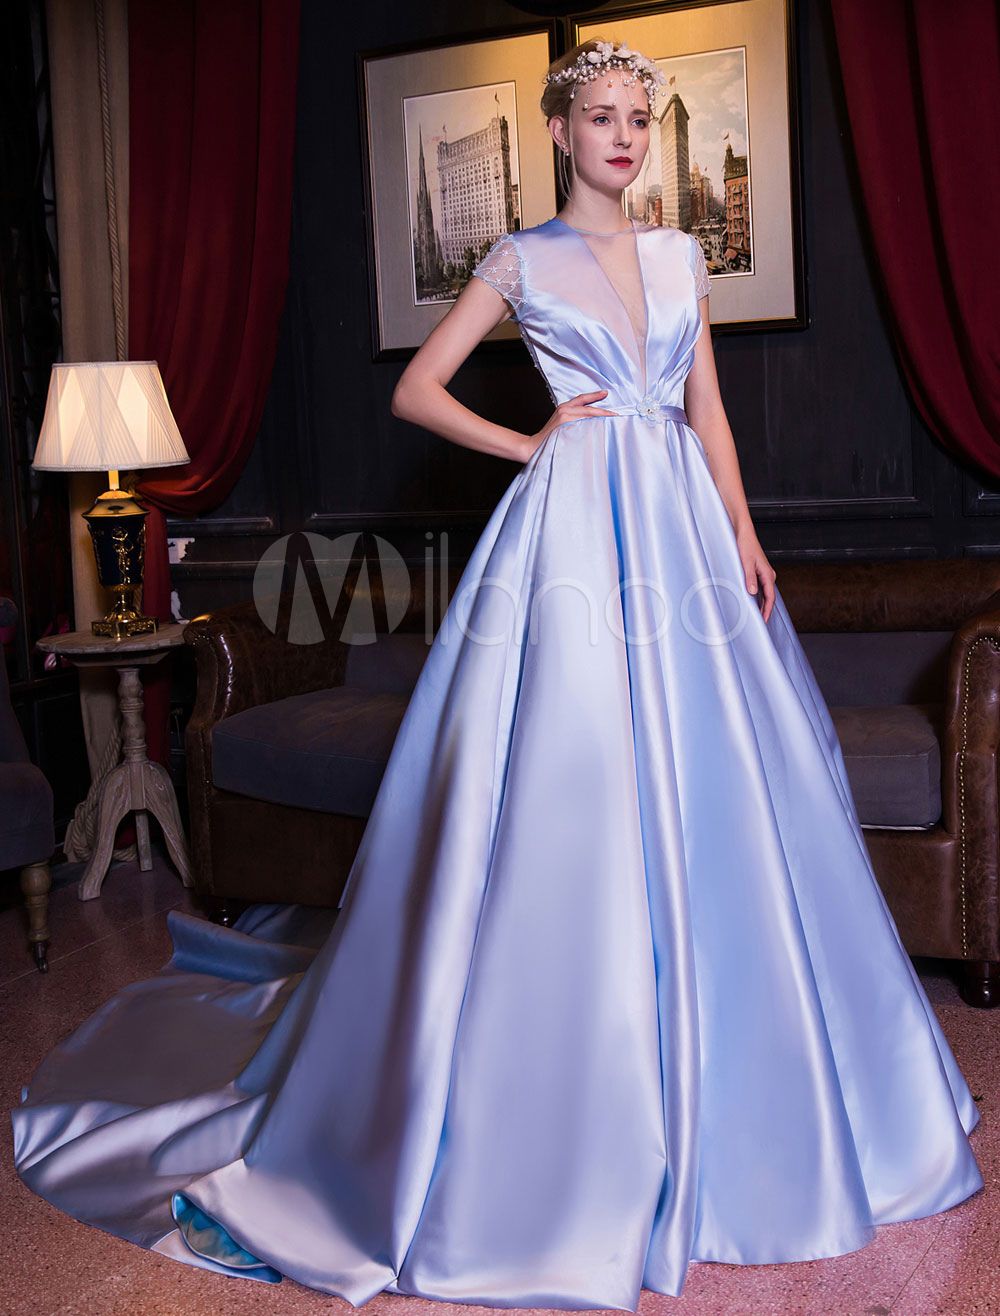 Satin Wedding Dress V Neck Backless Quinceanera Dress Beaded Plunging Illusion Baby Blue Long Train Bridal Gown (Quinceanera Dresses) photo